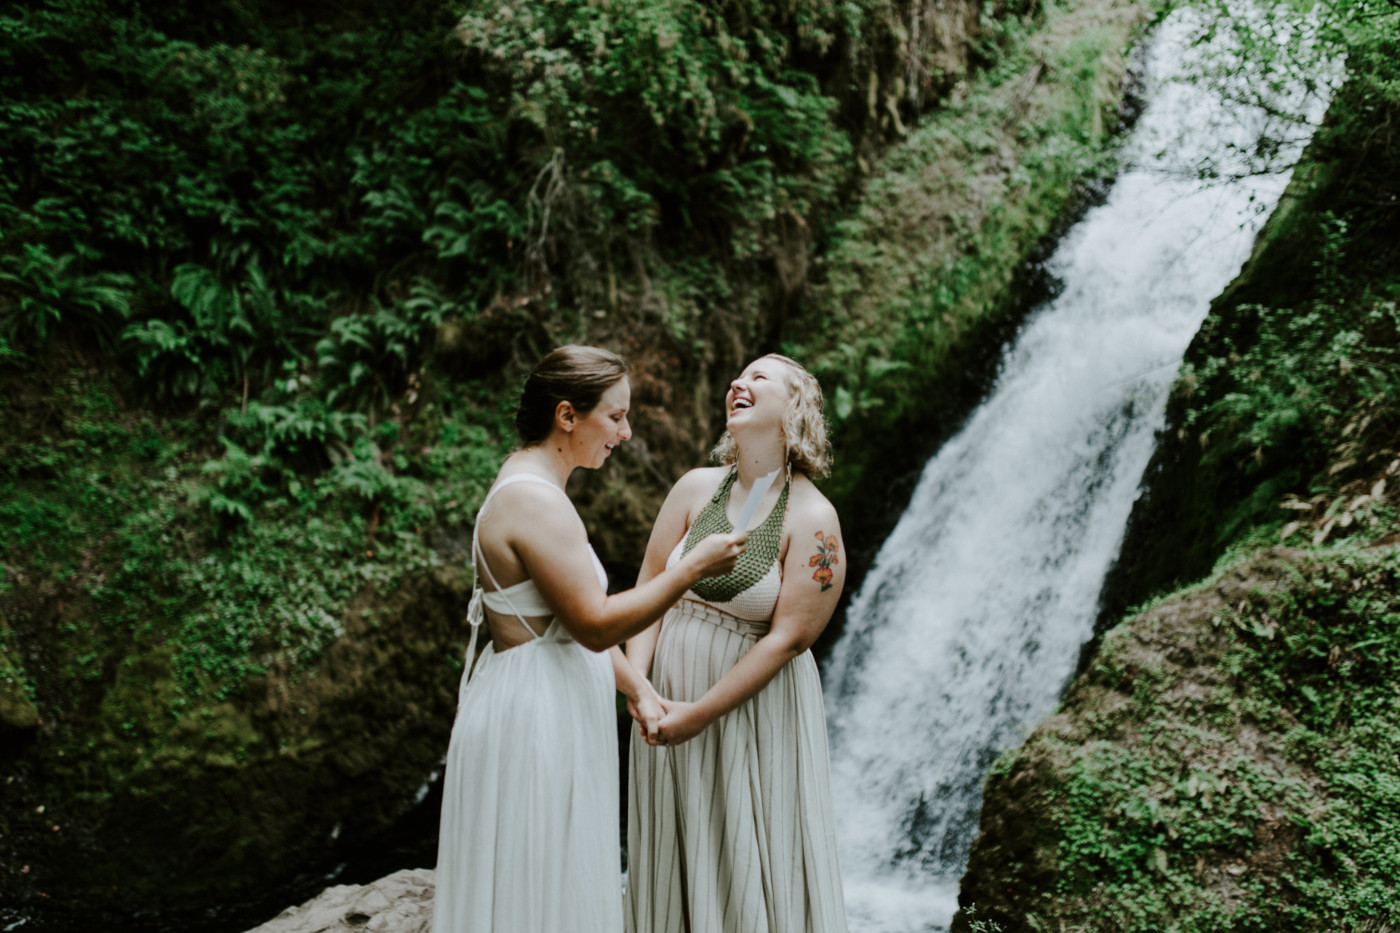 Kate laughs with Audrey. Elopement wedding photography at Bridal Veil Falls by Sienna Plus Josh.